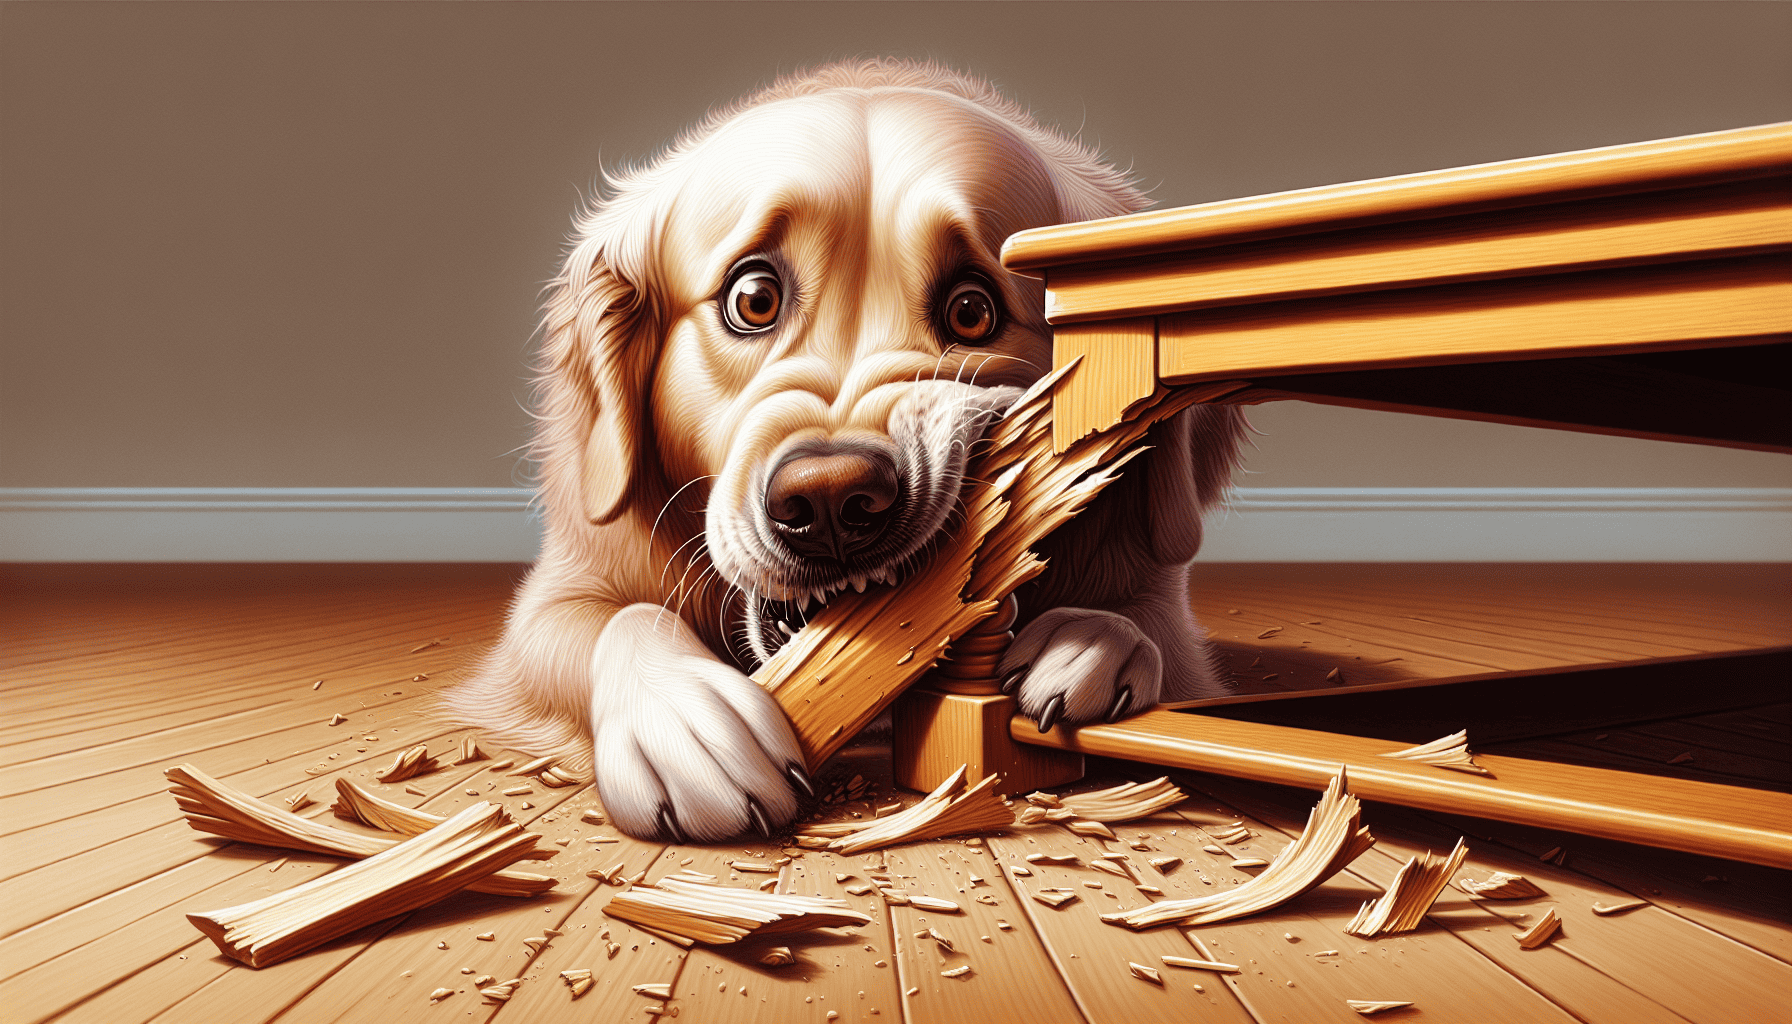 Illustration of a dog exhibiting destructive chewing as a symptom of separation anxiety